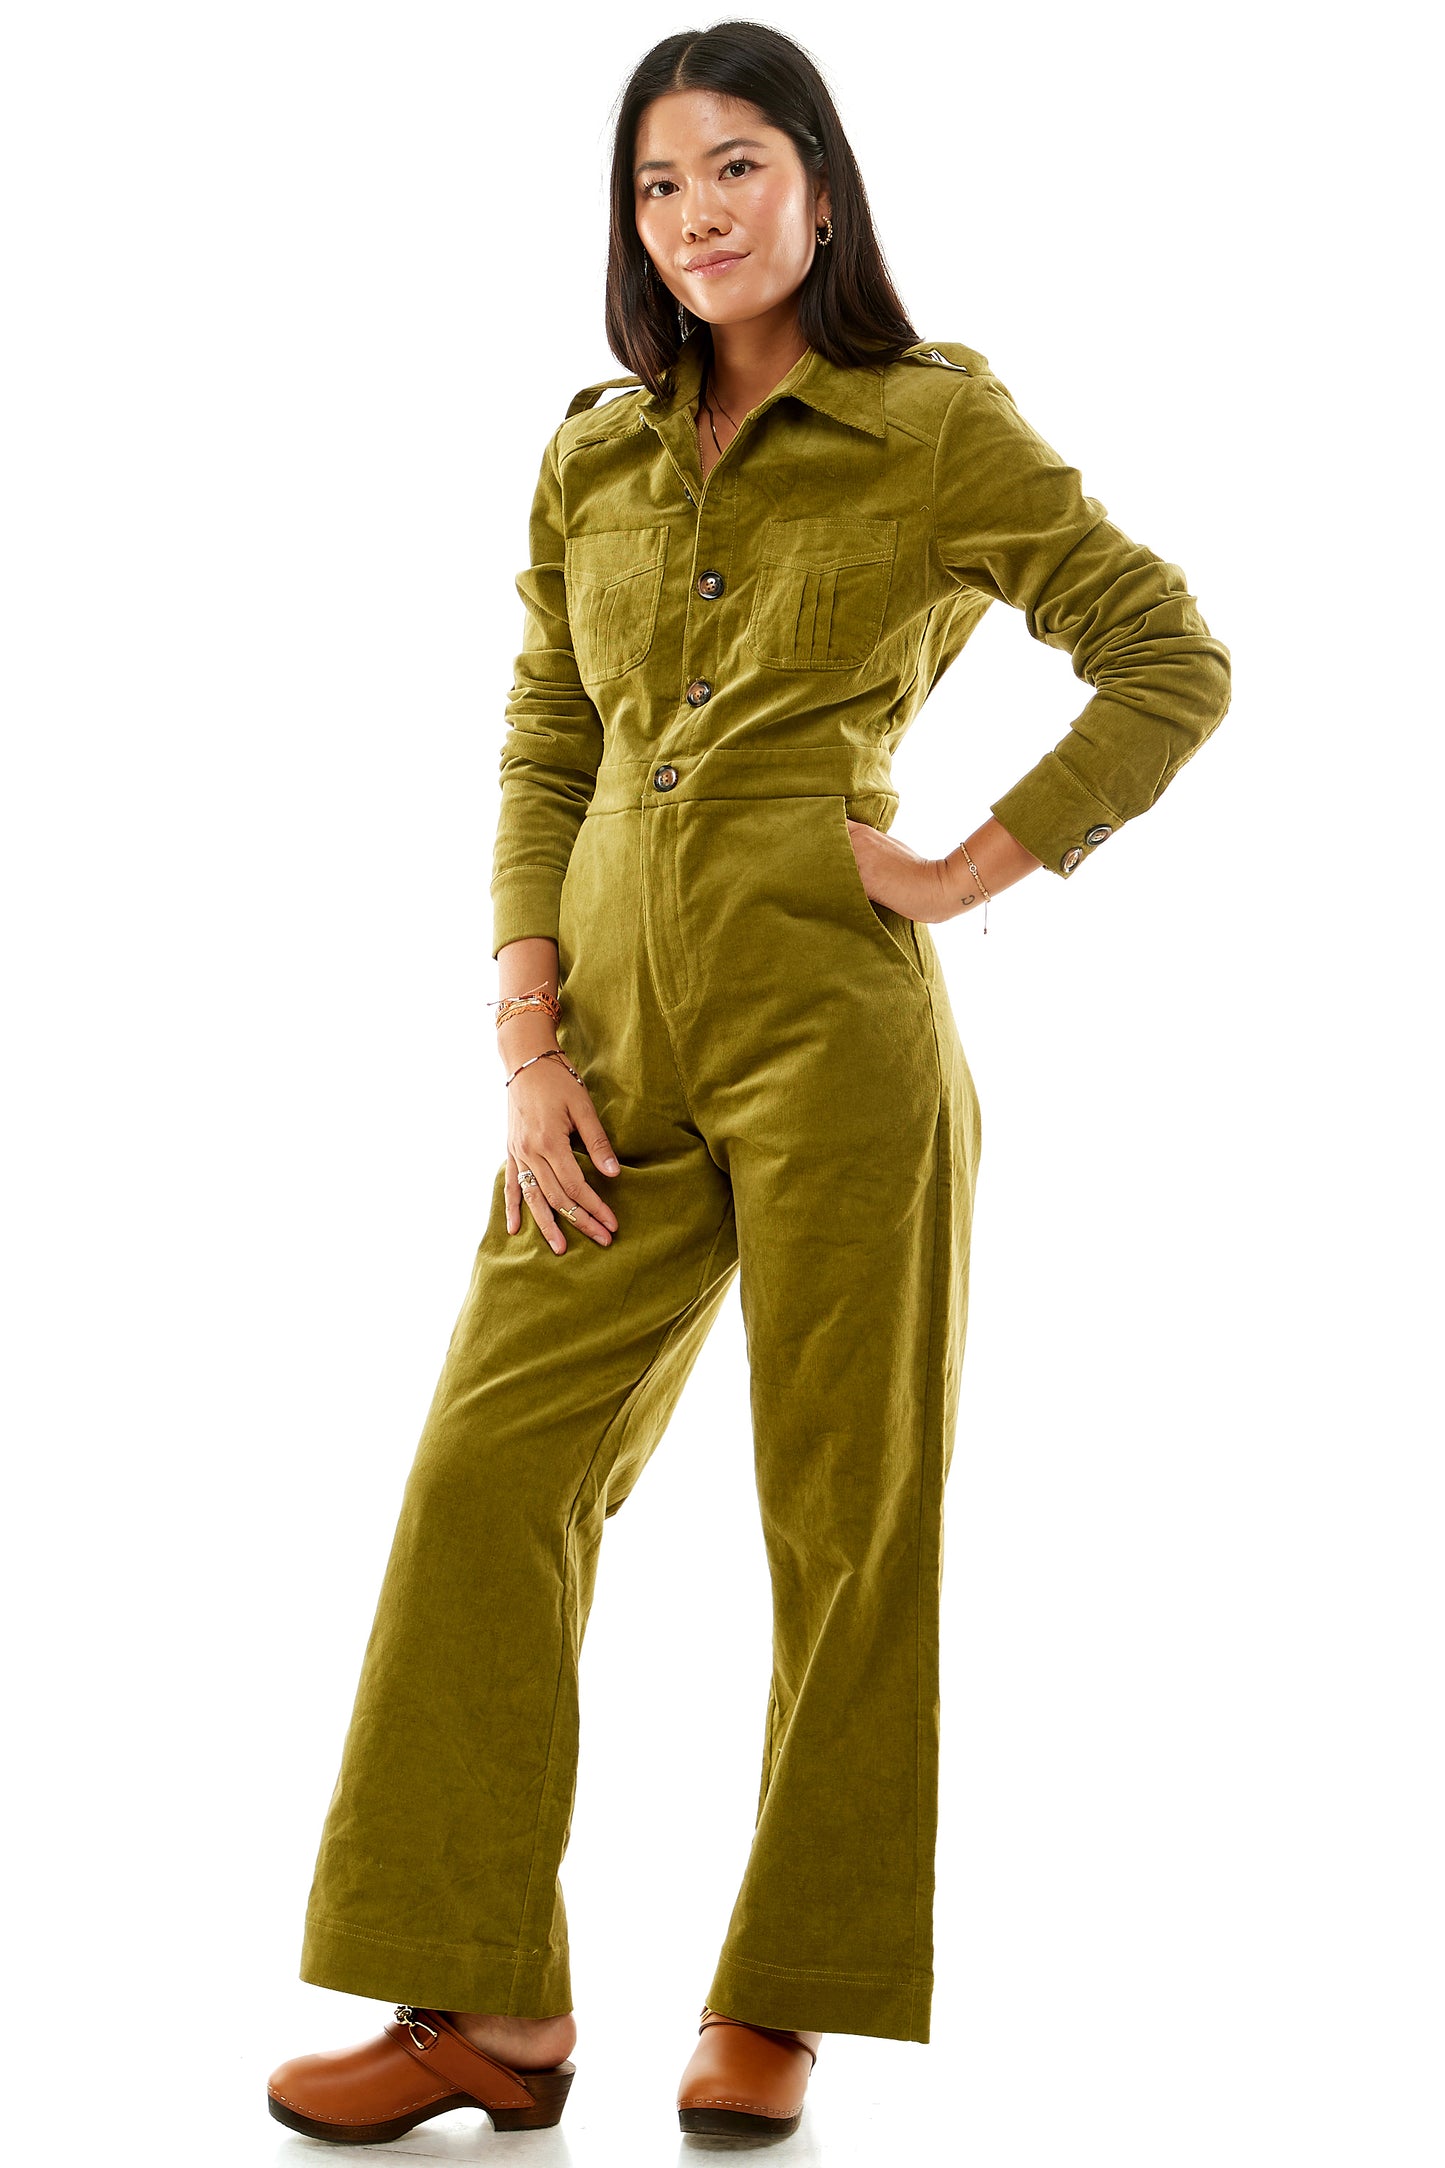 Marr's Long Sleeve Coverall